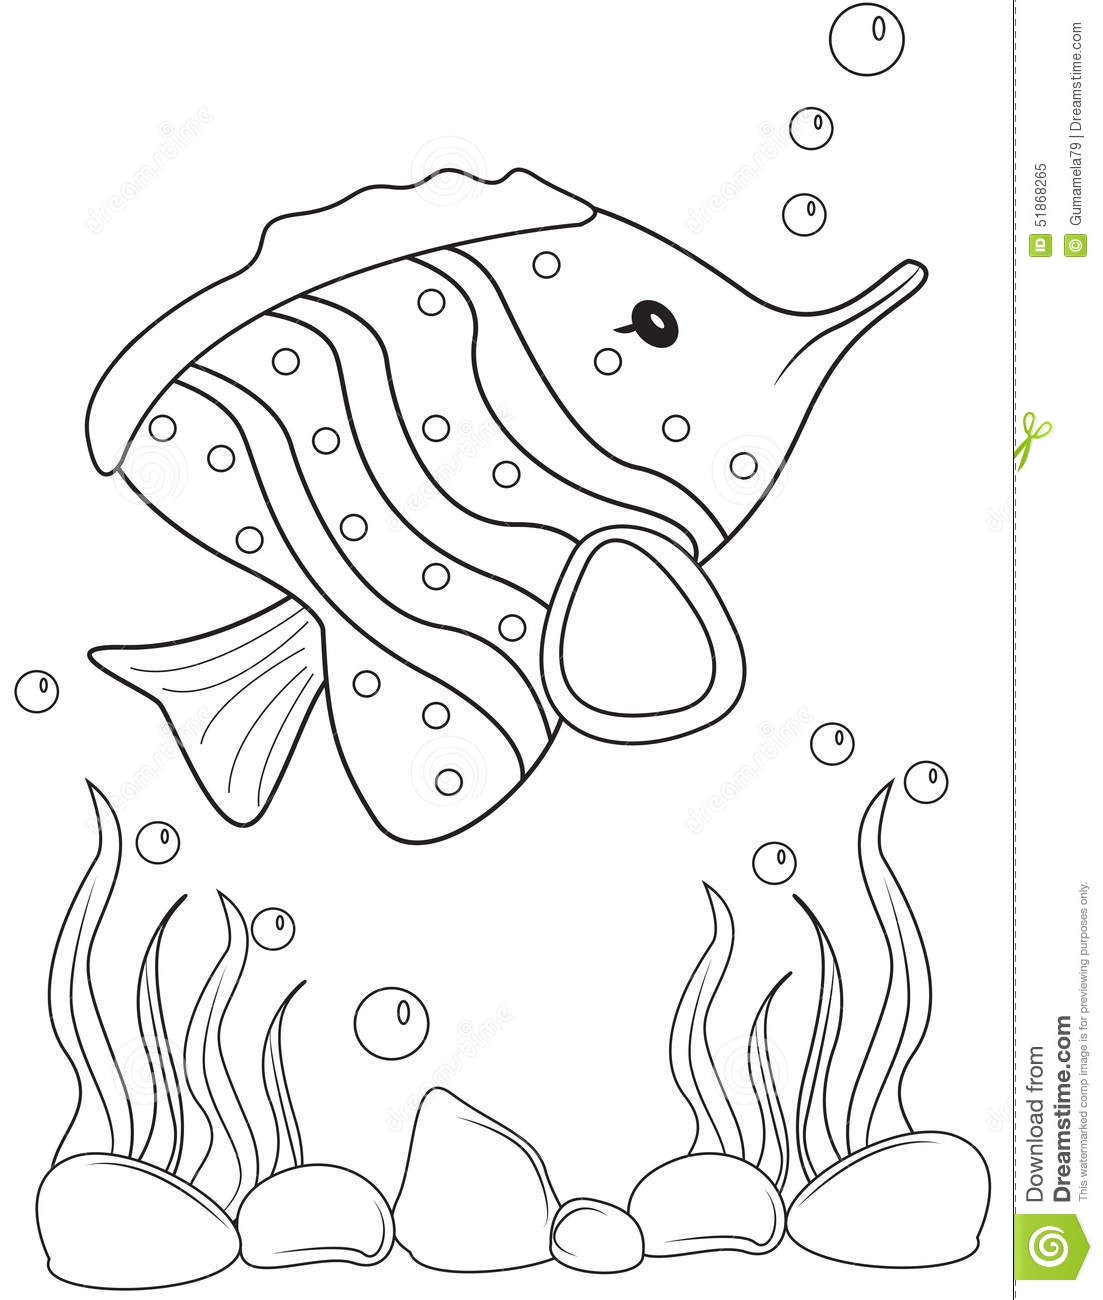 Coloring Book Kids
 Fish coloring page stock illustration Image of beauty